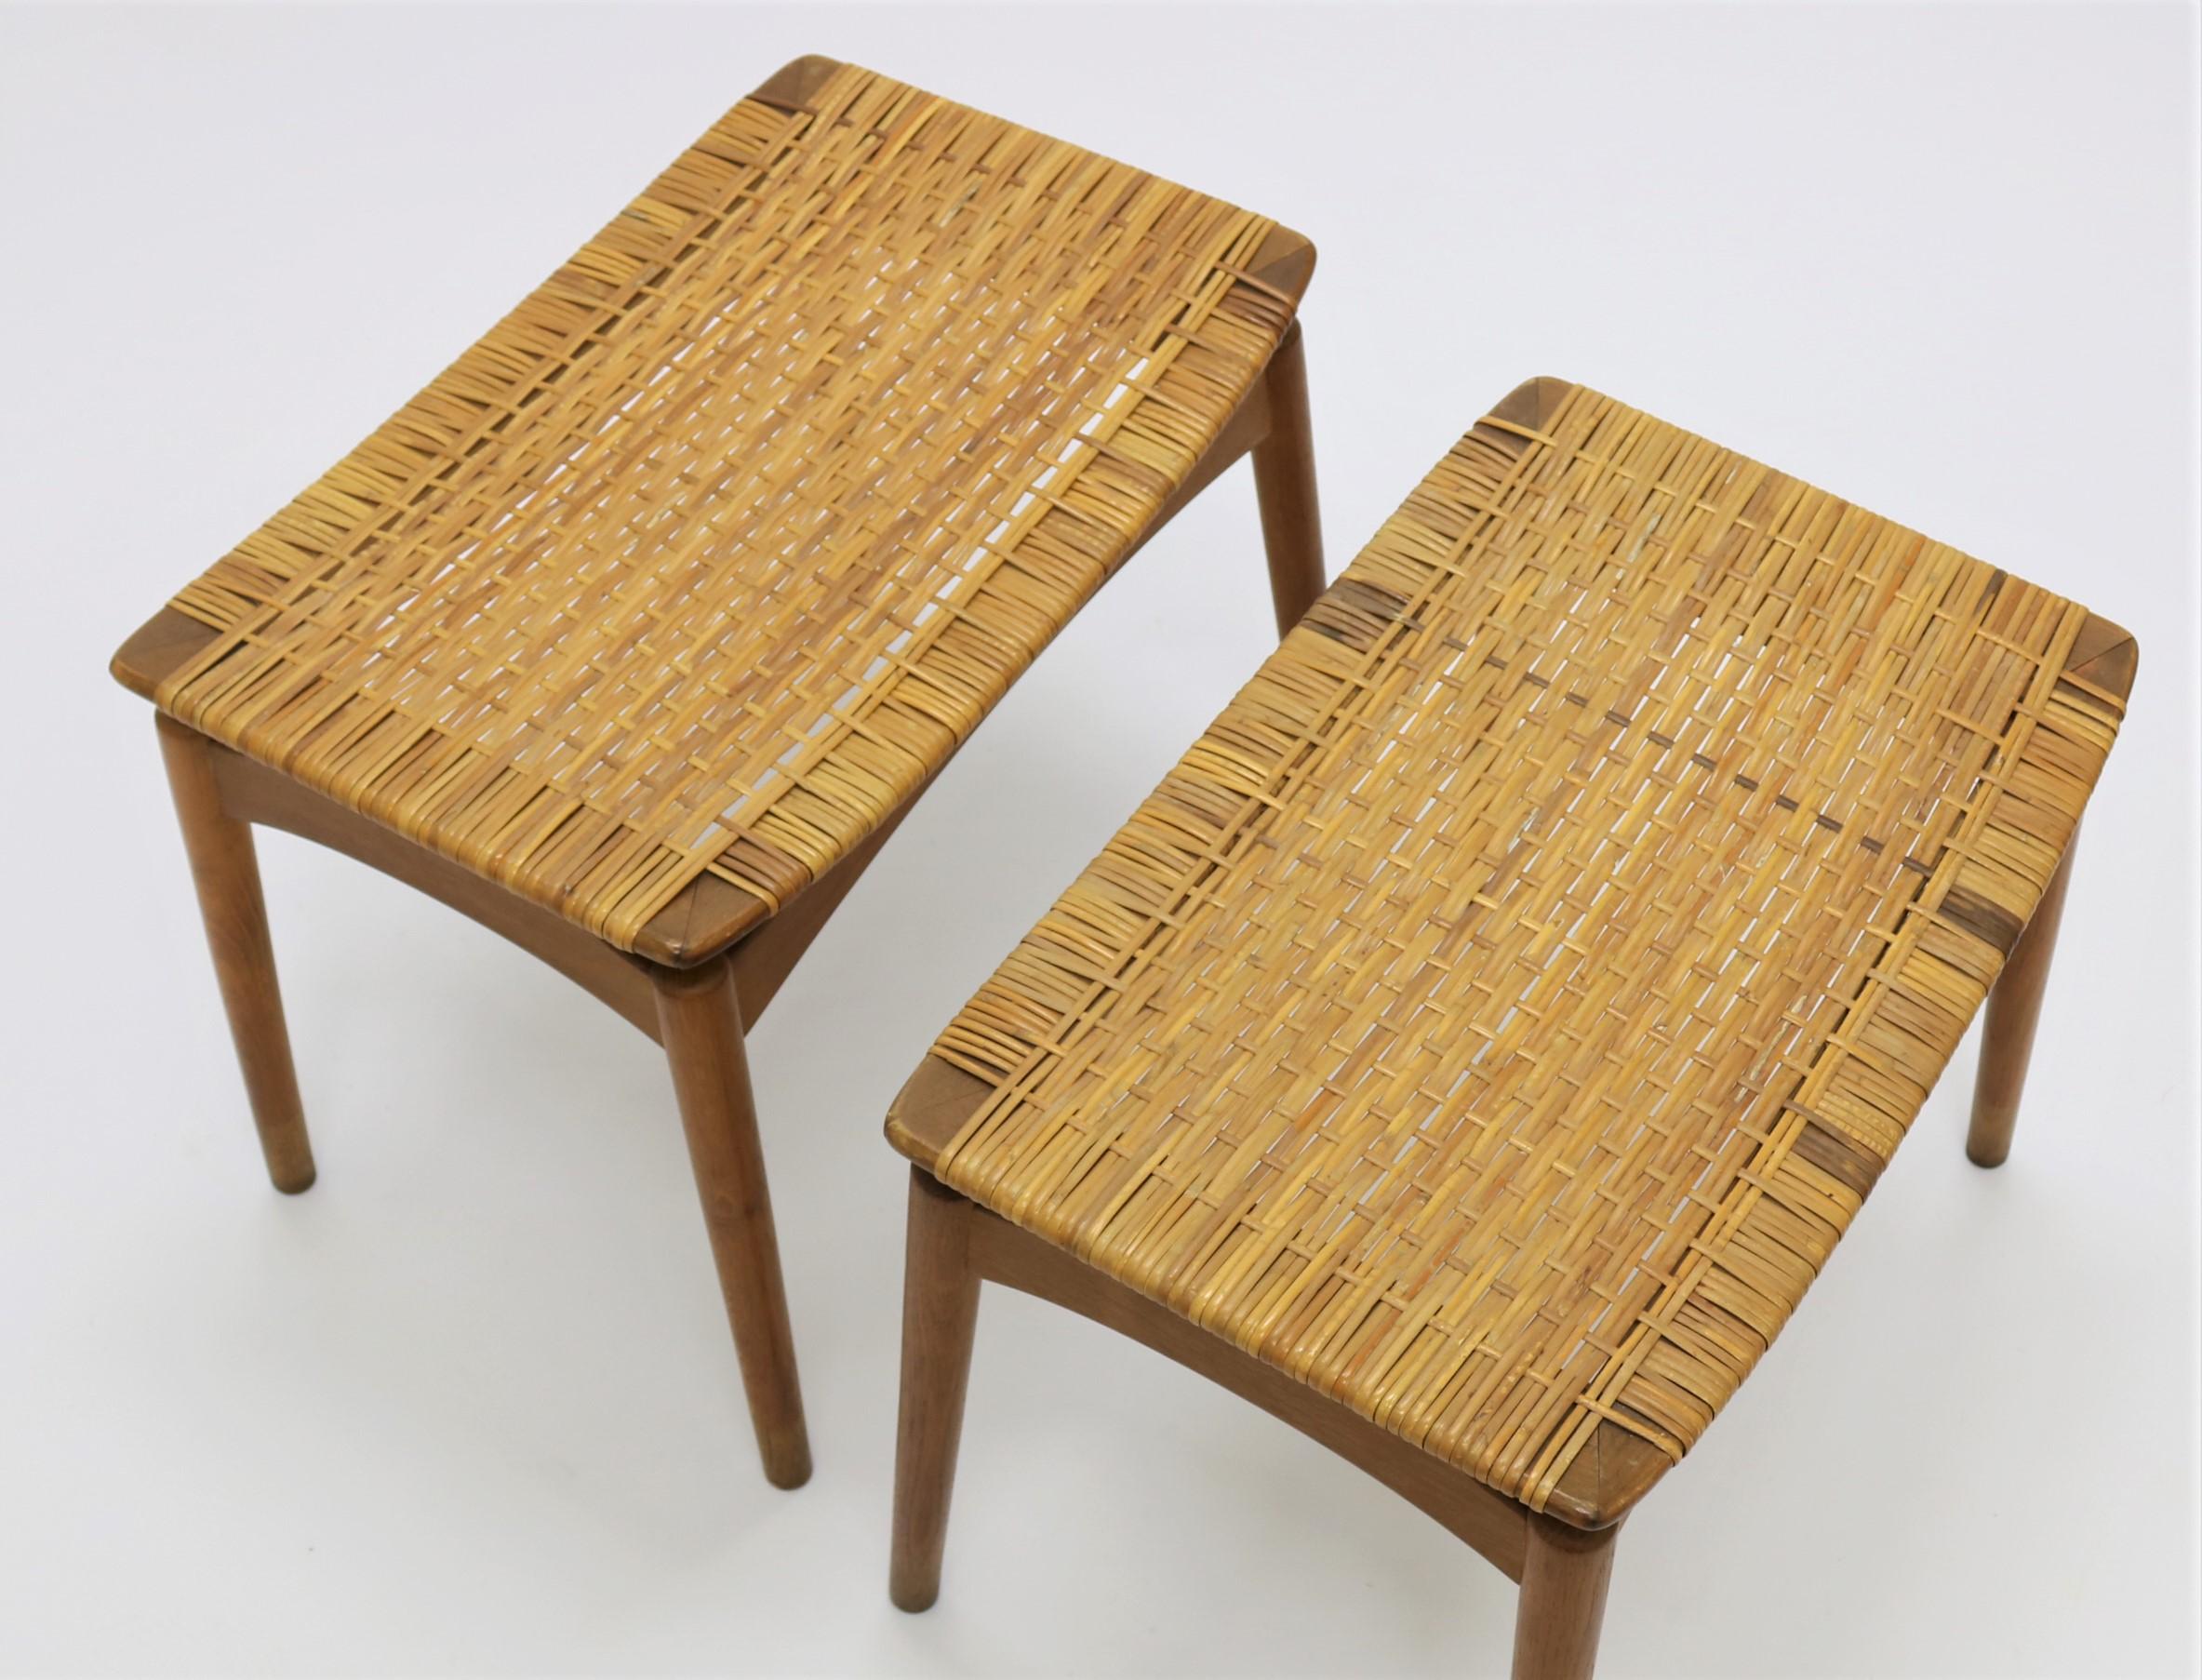 Pair of Scandinavian Modern Stools in Oak and Cane by Olholm Denmark, 1950s 5